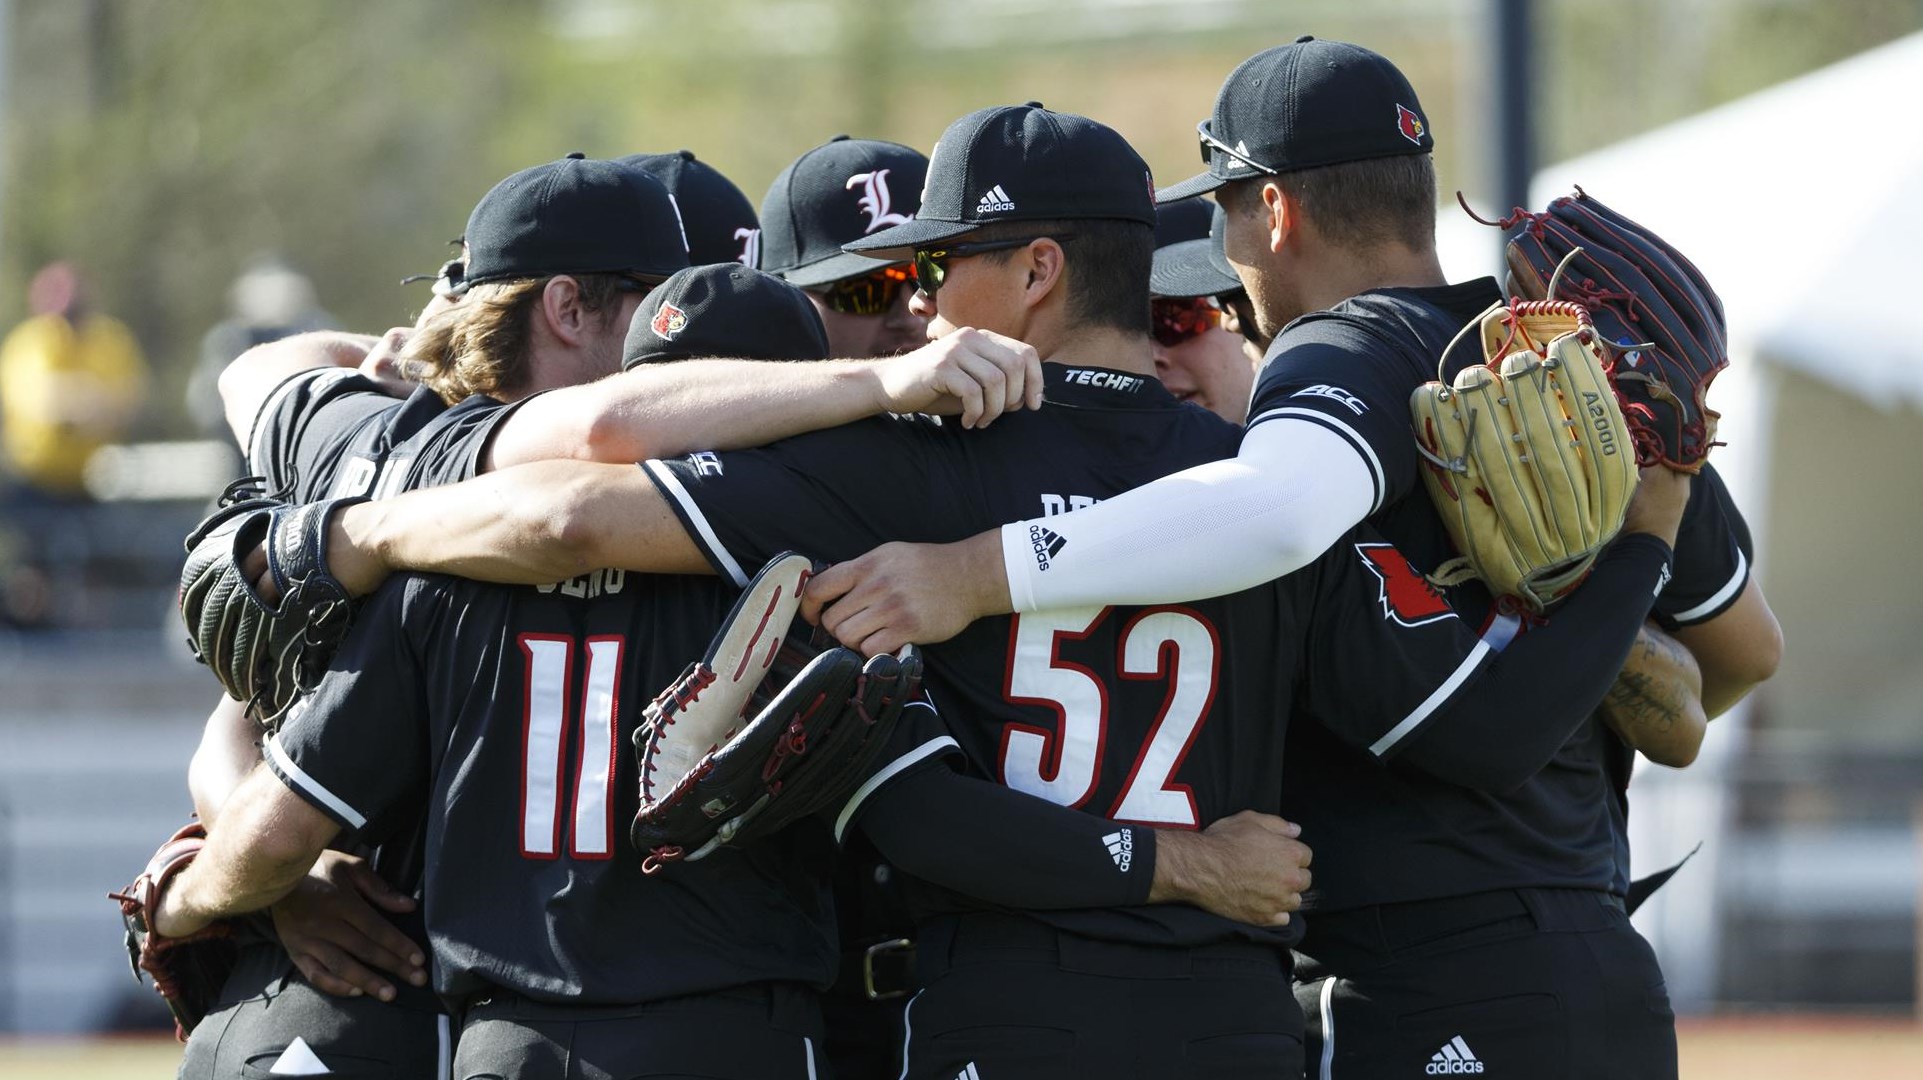 The Cardinals huddle before the game against Florida State at Jim Patterson Stadium on April 9.